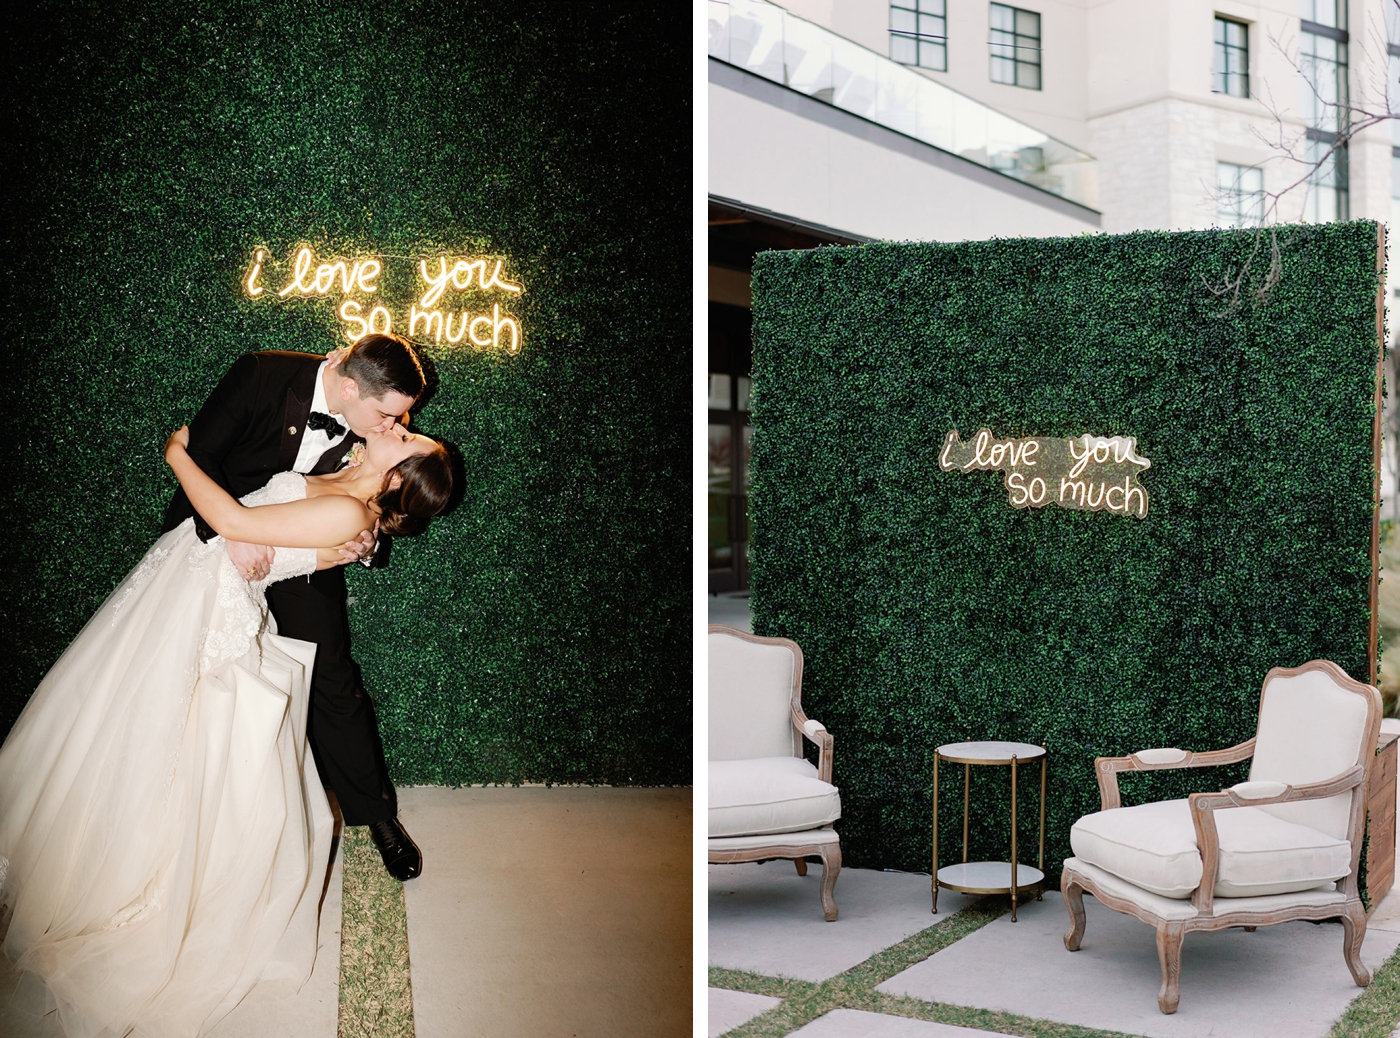 Neon signs for an Austin wedding